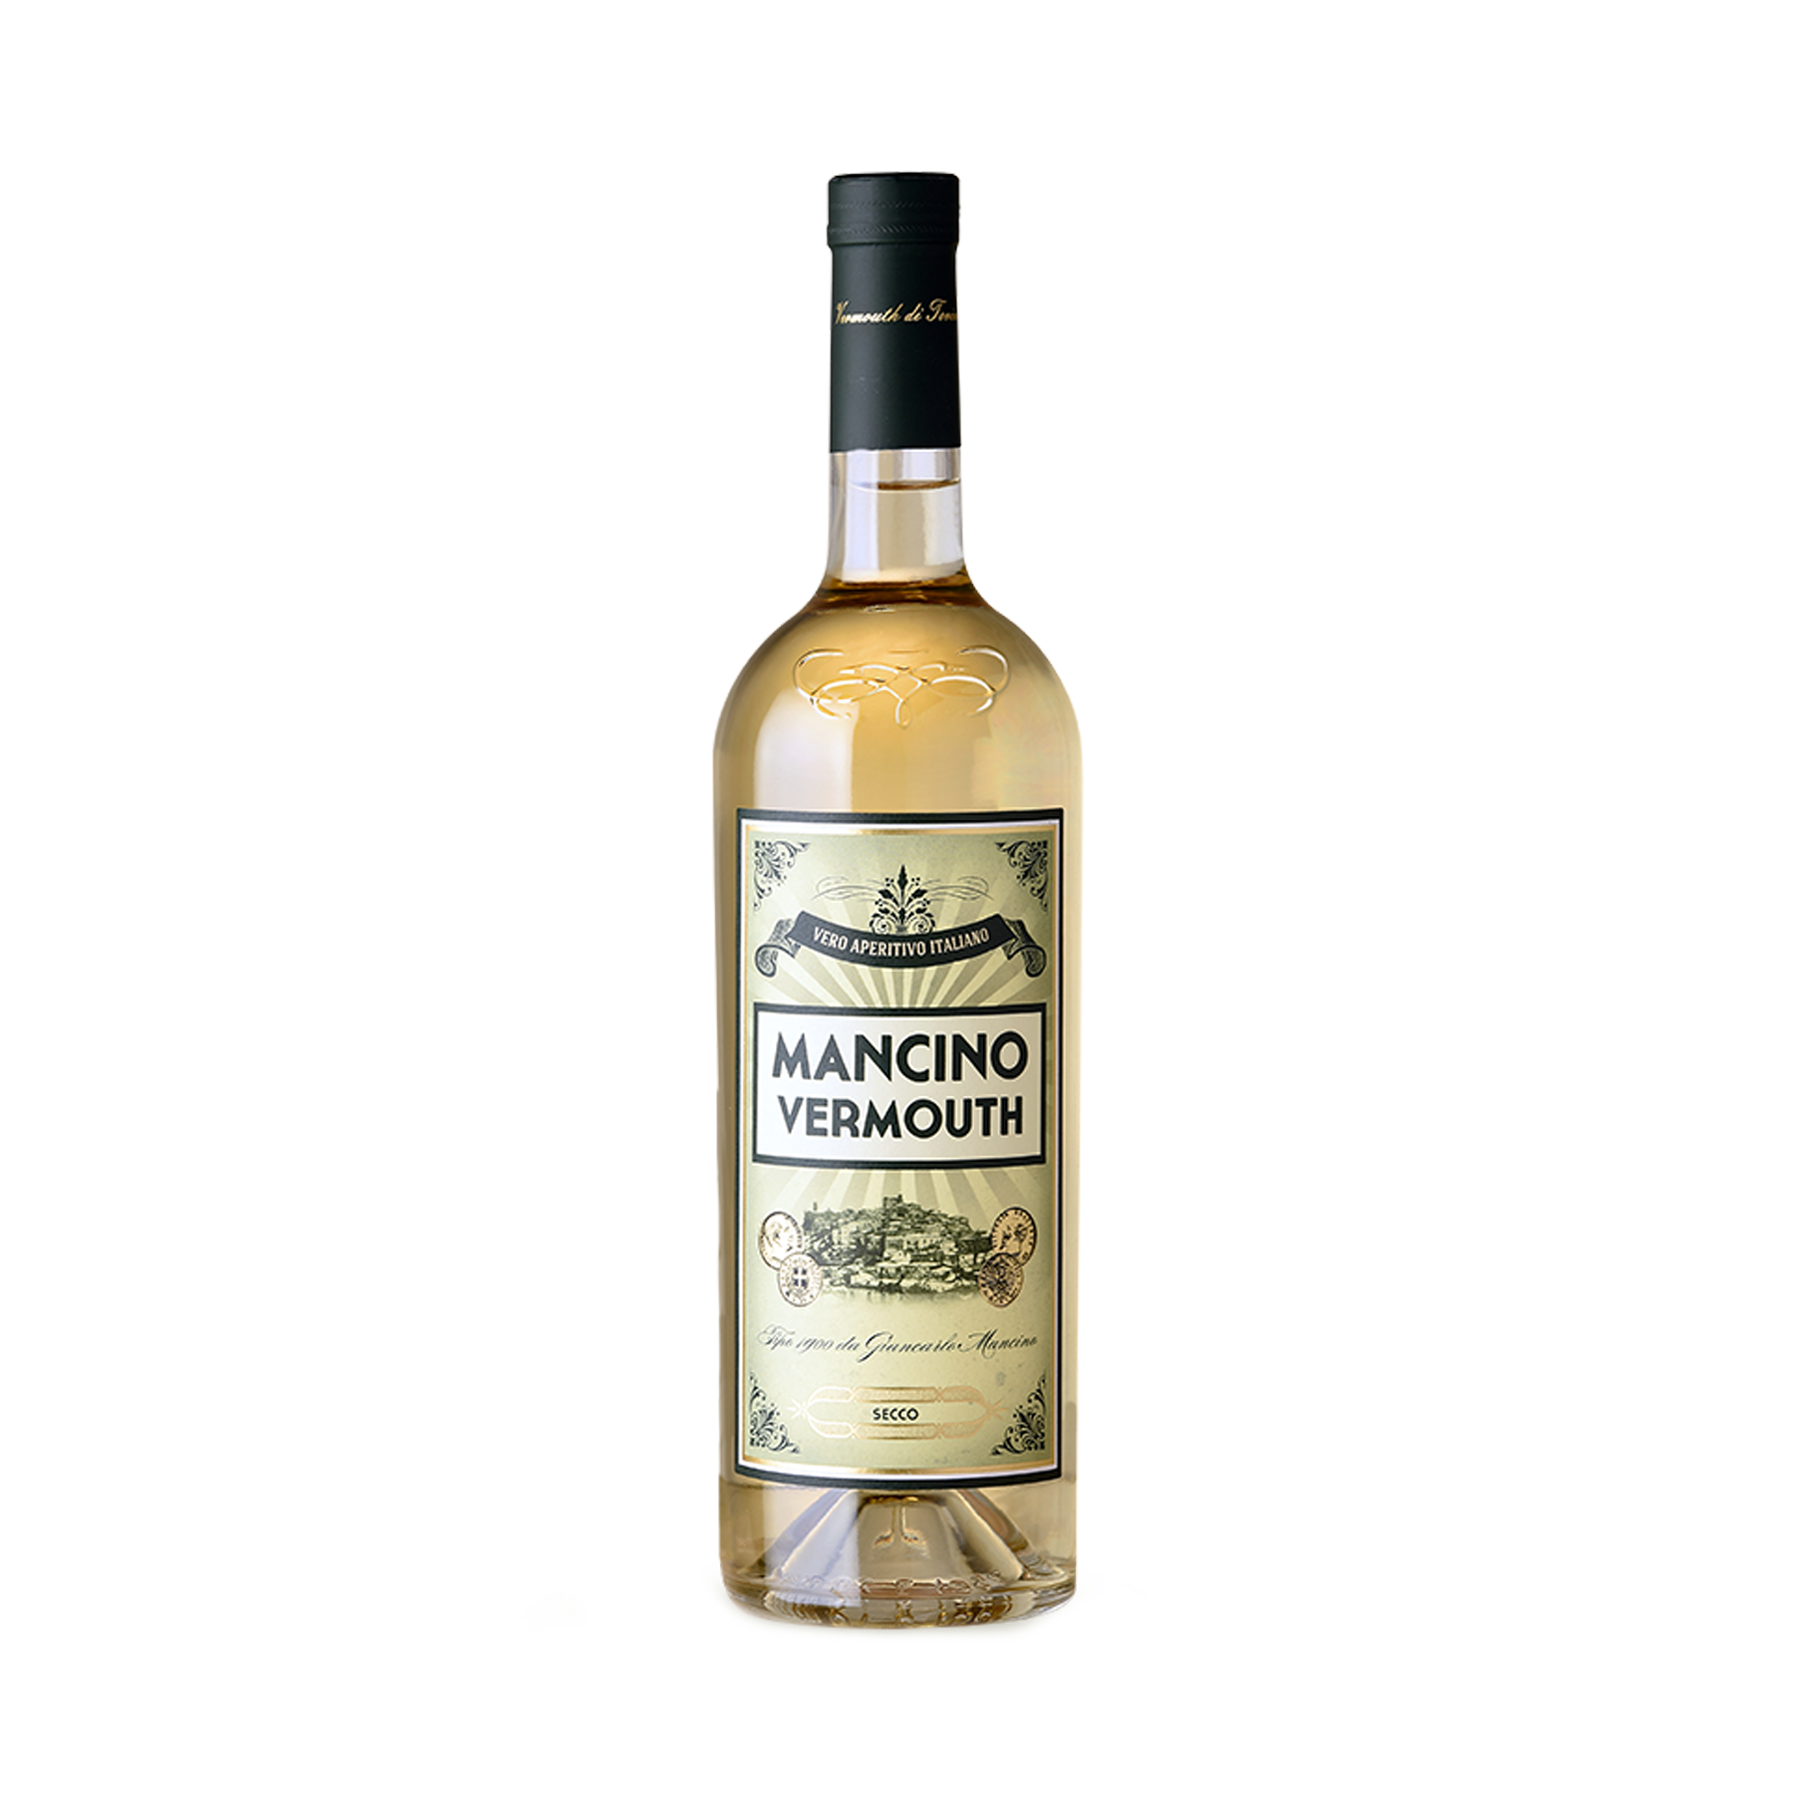 MANCINO VERMOUTH DRY 750 MLT 18%